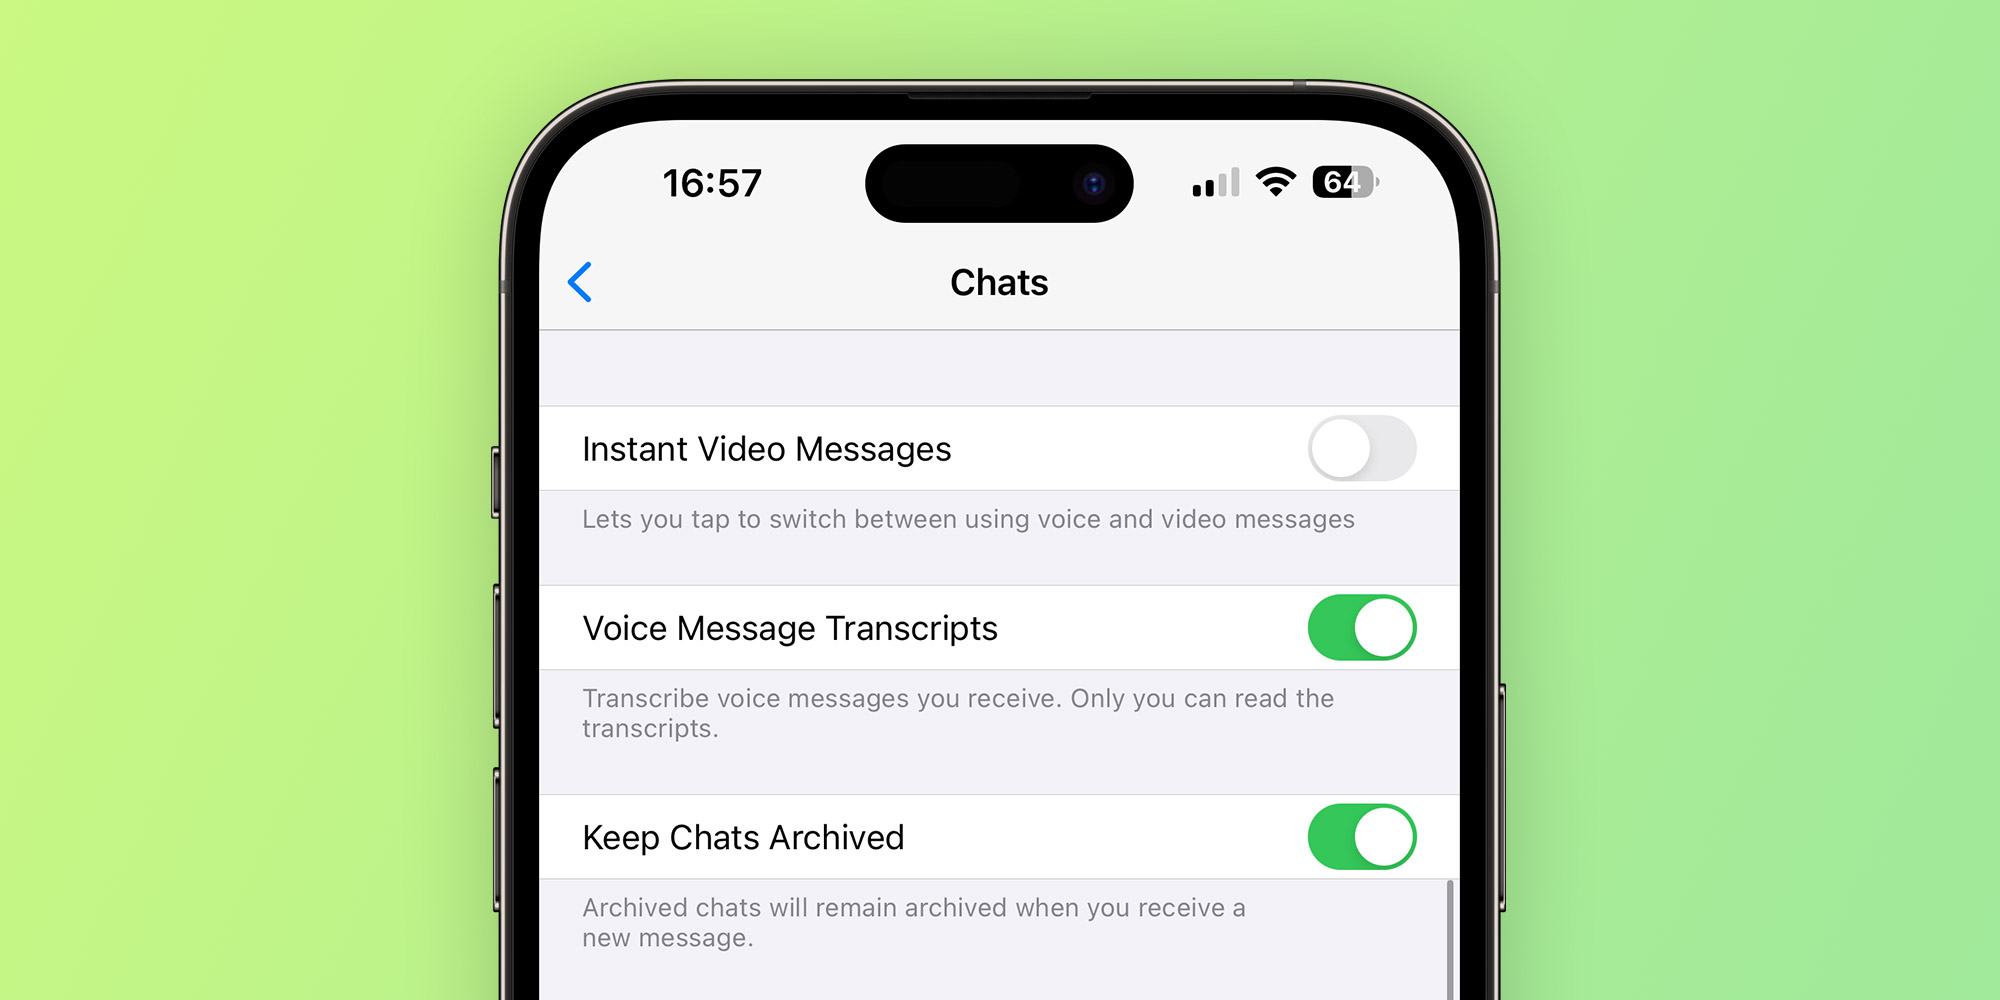 WhatsApp to let users disable new Instant Video Message feature